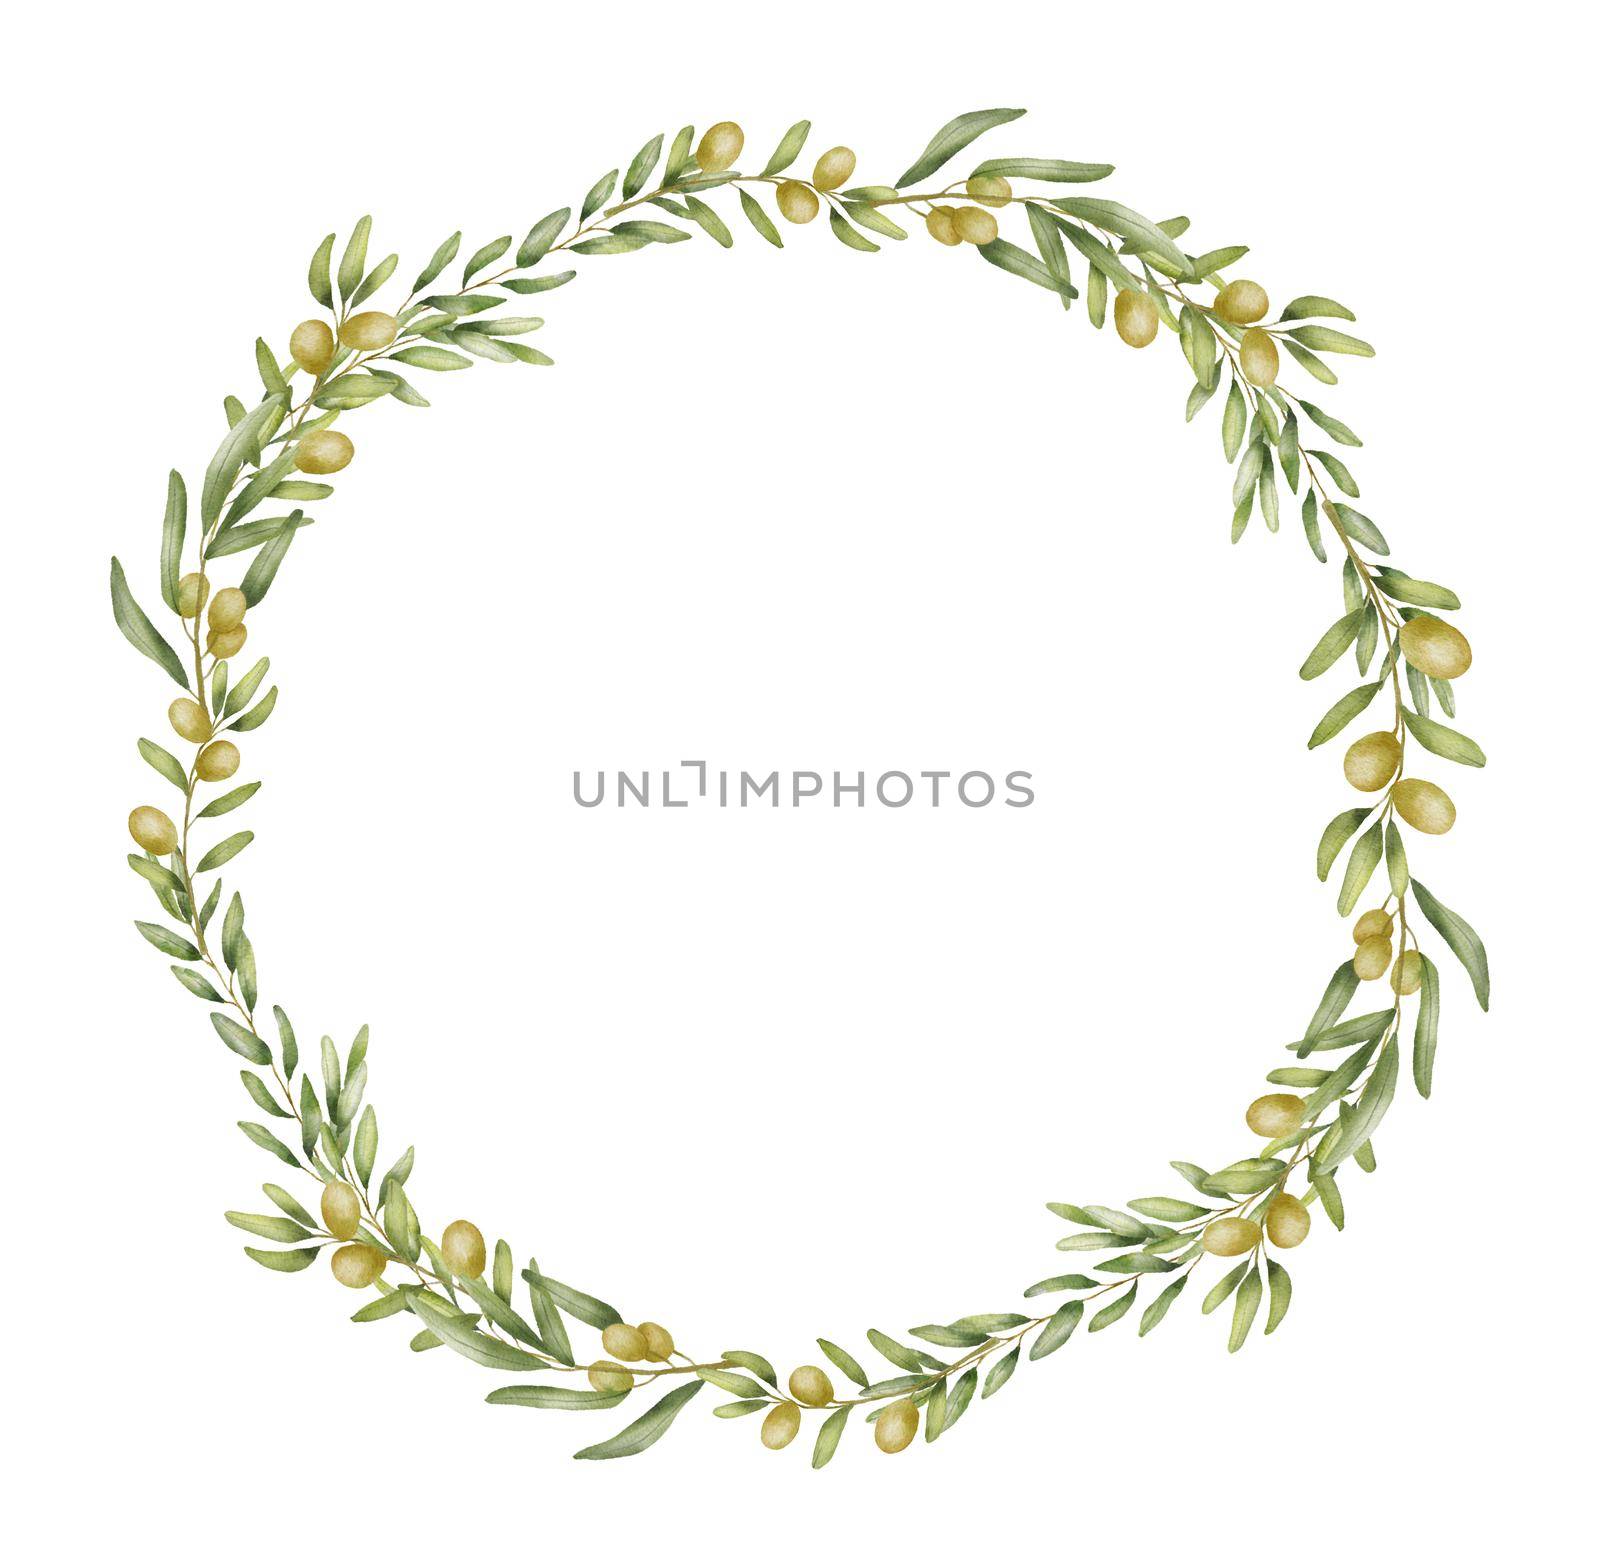 Round wreath with Olive branch watercolor drawing. Hand drawn frame with olive leaves isolated on white.